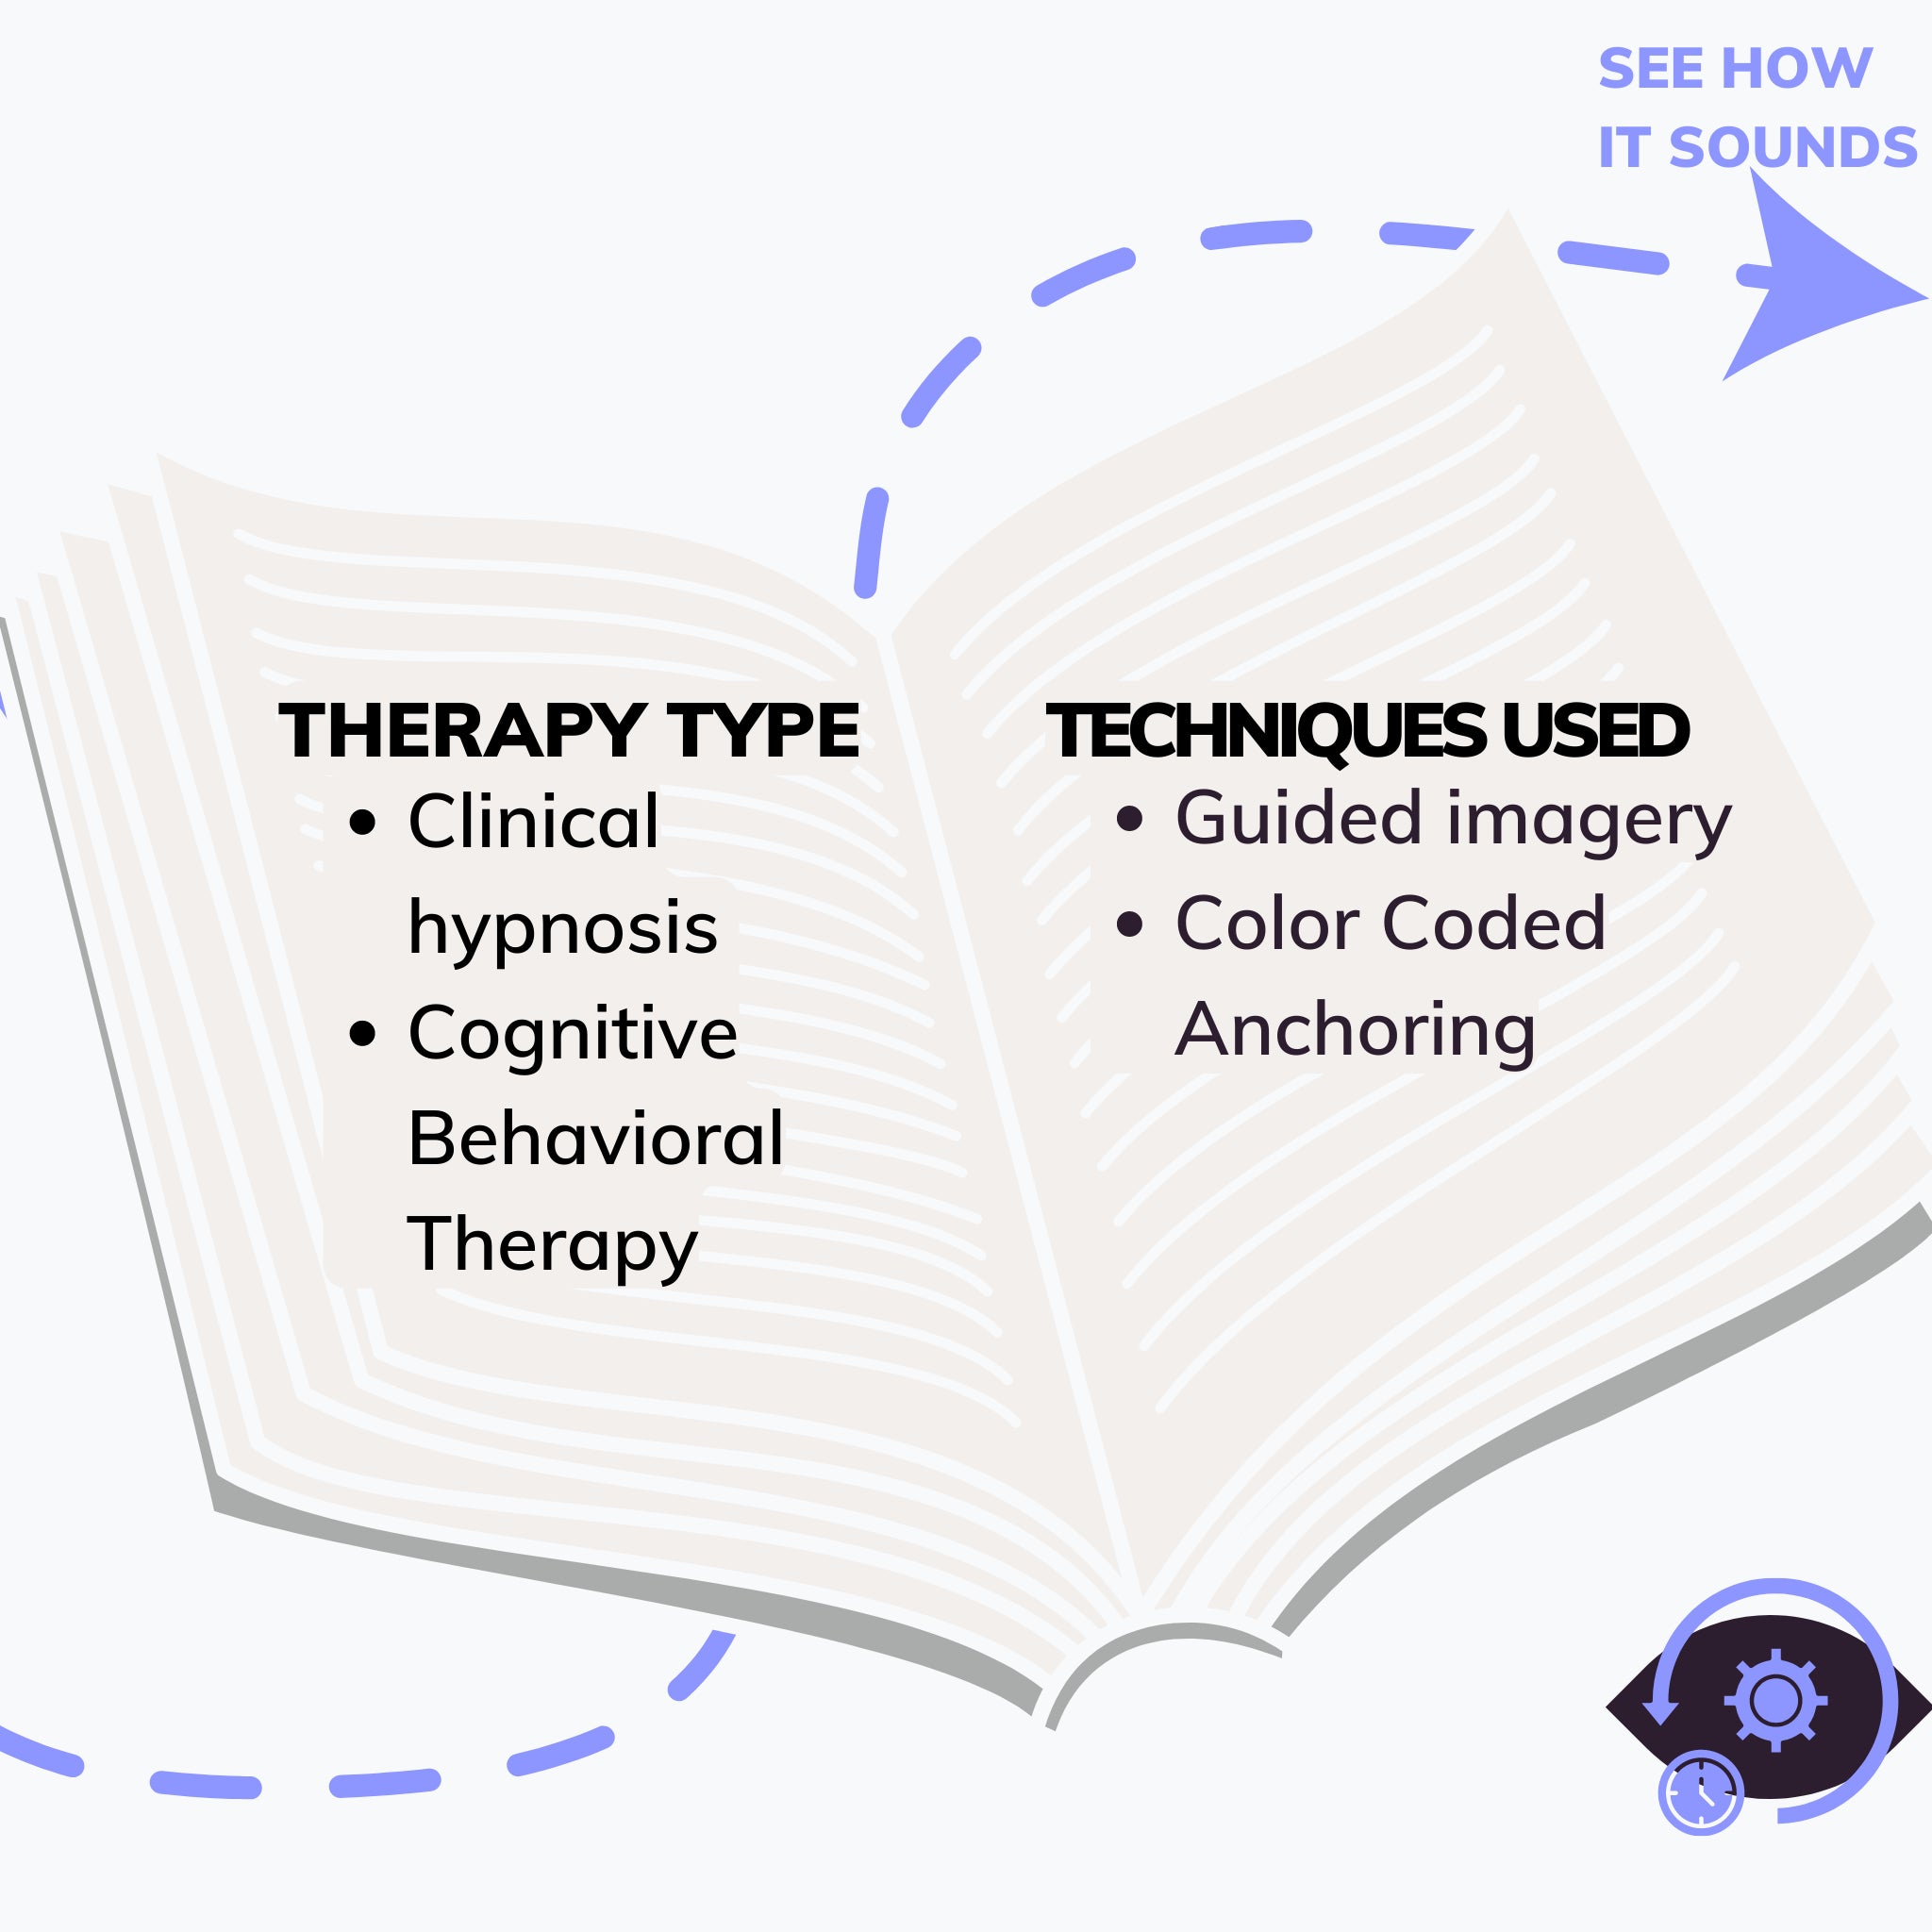 How it's made? Contains techniques from Clinical Hypnosis, Cognitive Behavioral Therapy, Directed Imagery, Creative Visualization & Color Coded Anchoring.